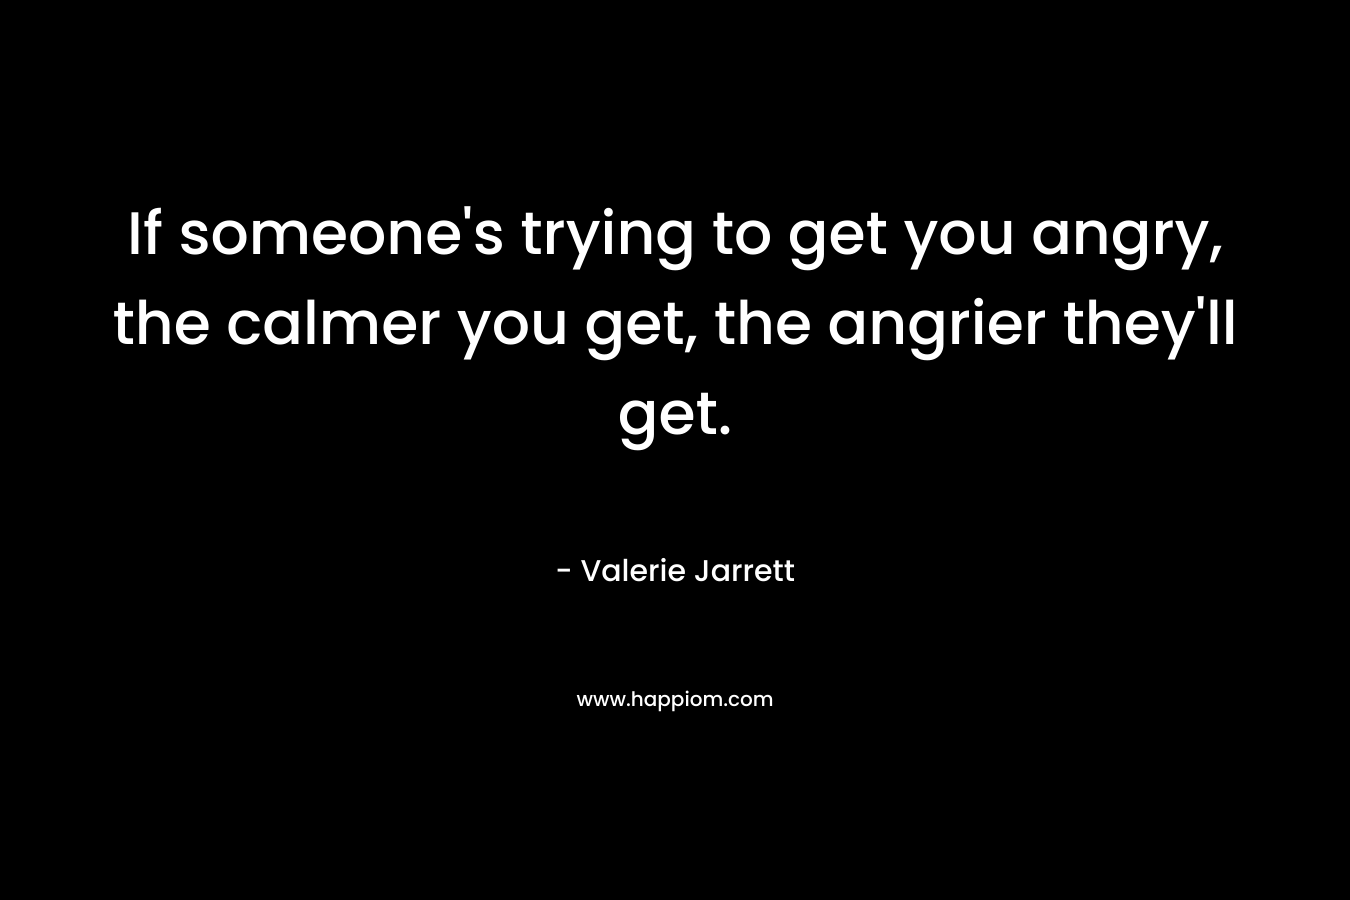 If someone’s trying to get you angry, the calmer you get, the angrier they’ll get. – Valerie Jarrett